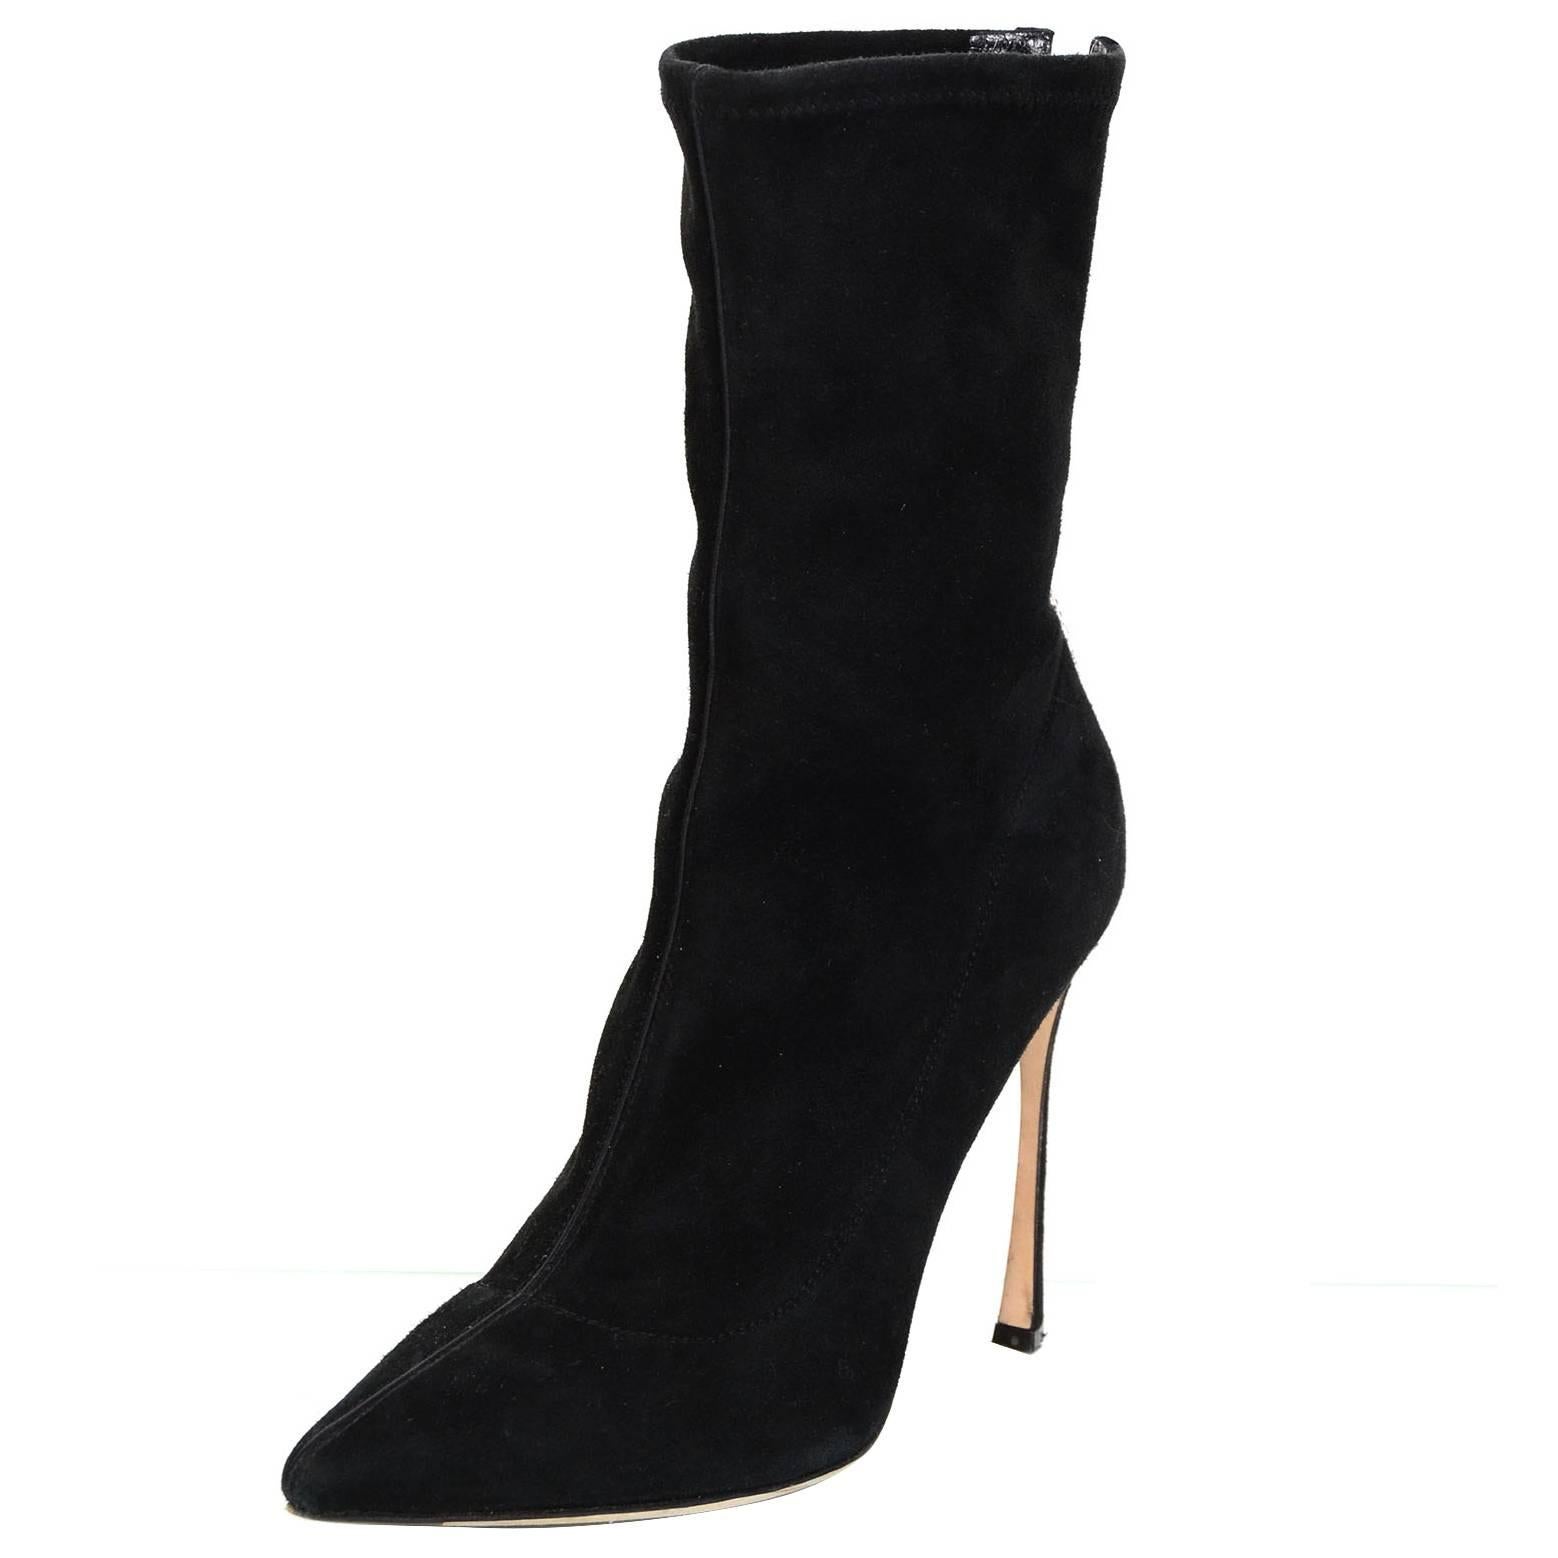 Sergio Rossi Black Suede Point Toe Boots w/ Back Crystal Detail sz 38.5 rt $1460